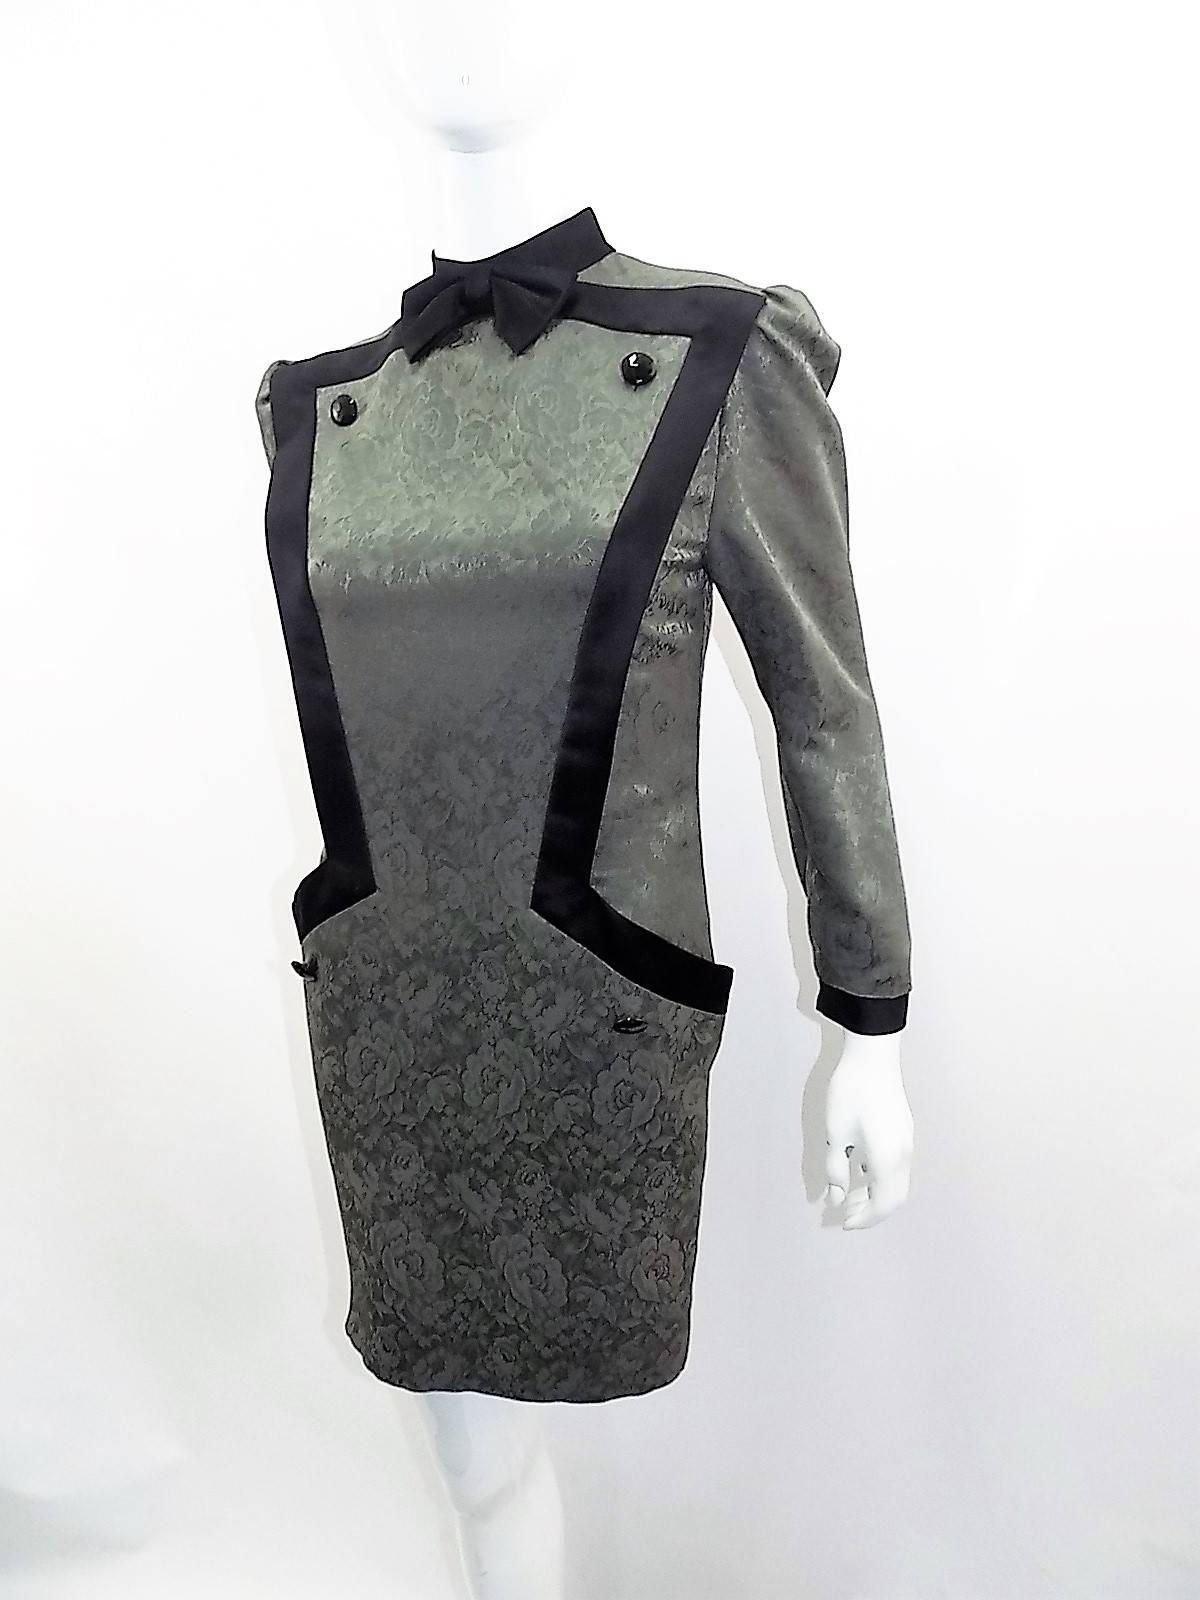 Circa late 1960's Vintage Nina Ricci dress .Wool and silk blend JACQUARD in satin finish. sage/ grey color with black details. Featuring front inserted pockets concealed by design, large black buttons and bow at the neckline. 
Zipper back closure.